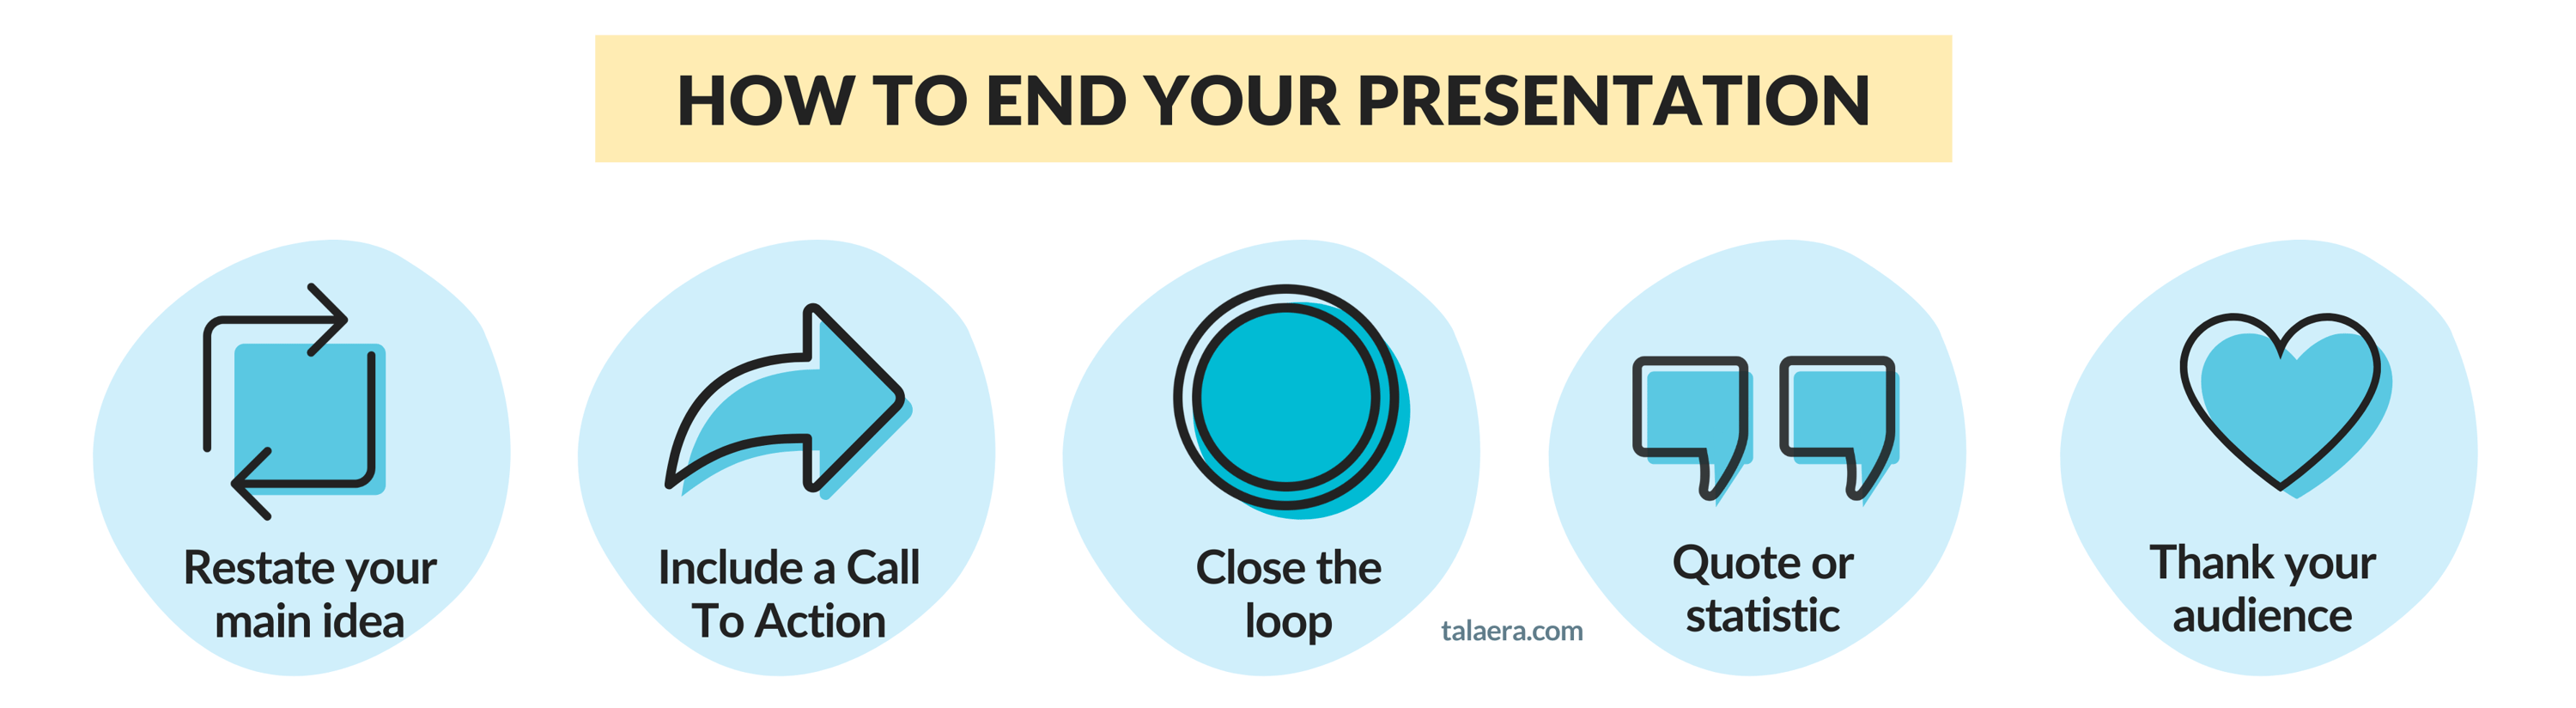 how to end a presentation for an interview